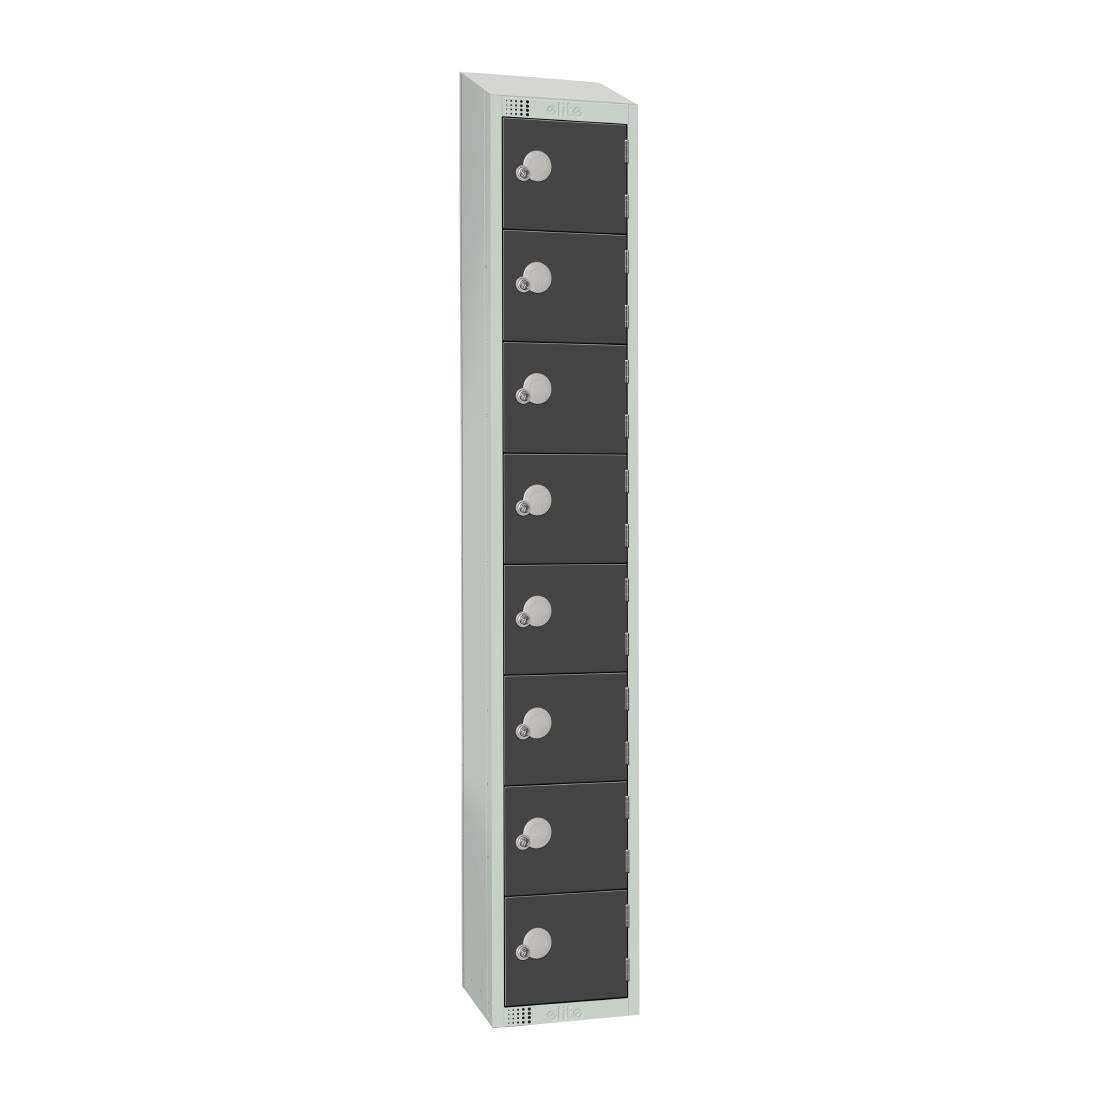 GR683-CNS Elite Eight Door Coin Return Locker with Sloping Top Graphite Grey JD Catering Equipment Solutions Ltd